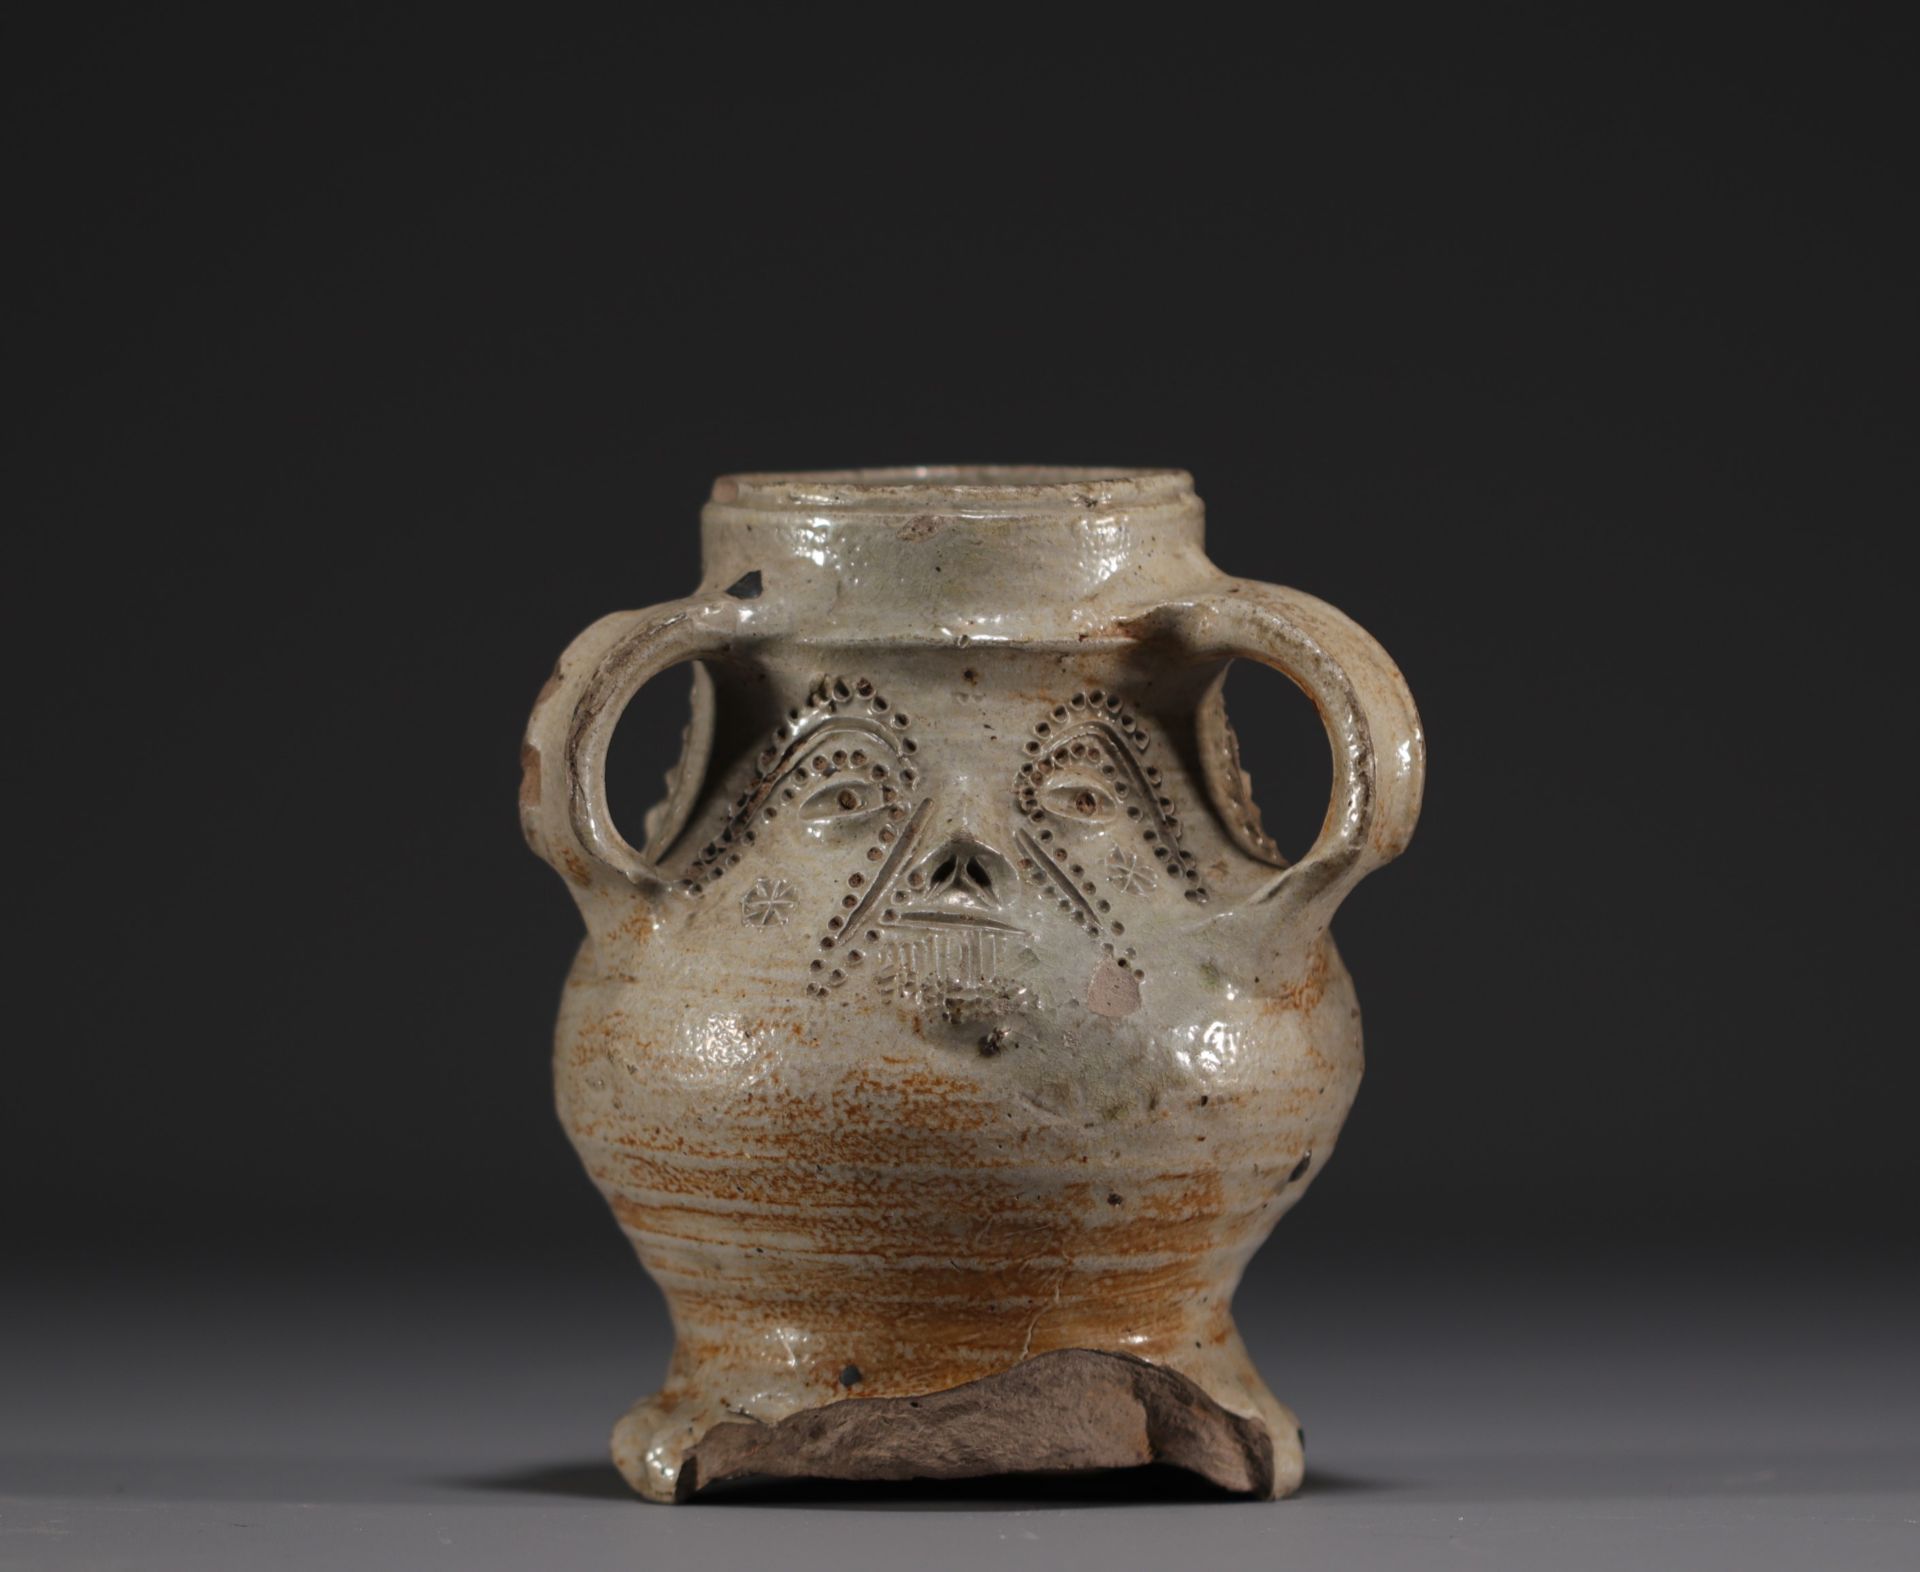 Raeren - Rare stoneware jug decorated with faces, salt glaze, early 16th century. - Image 2 of 5